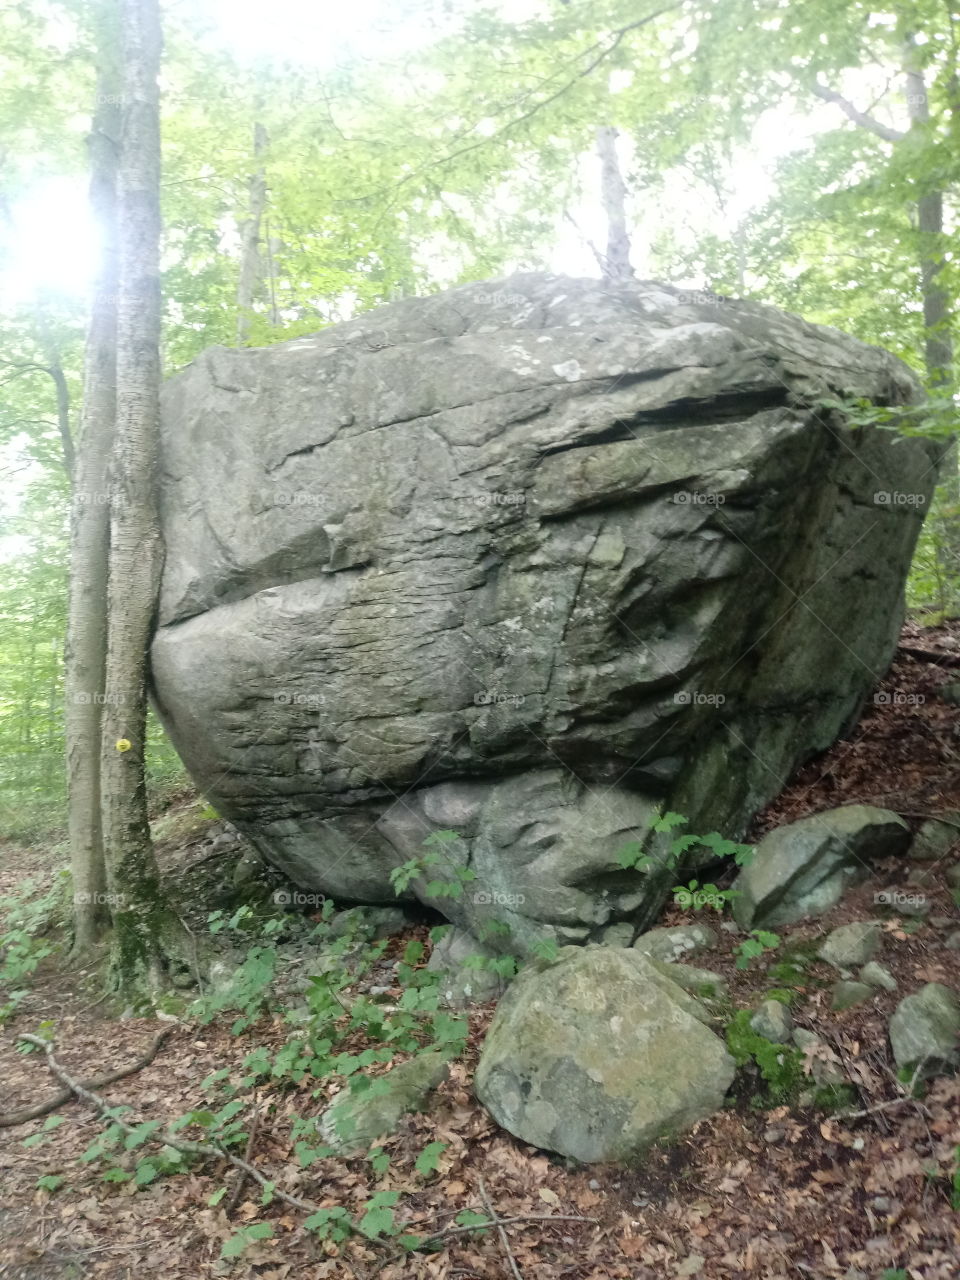 This was a gigantic rock I found during my hiking trip. At least fifteen feet high.